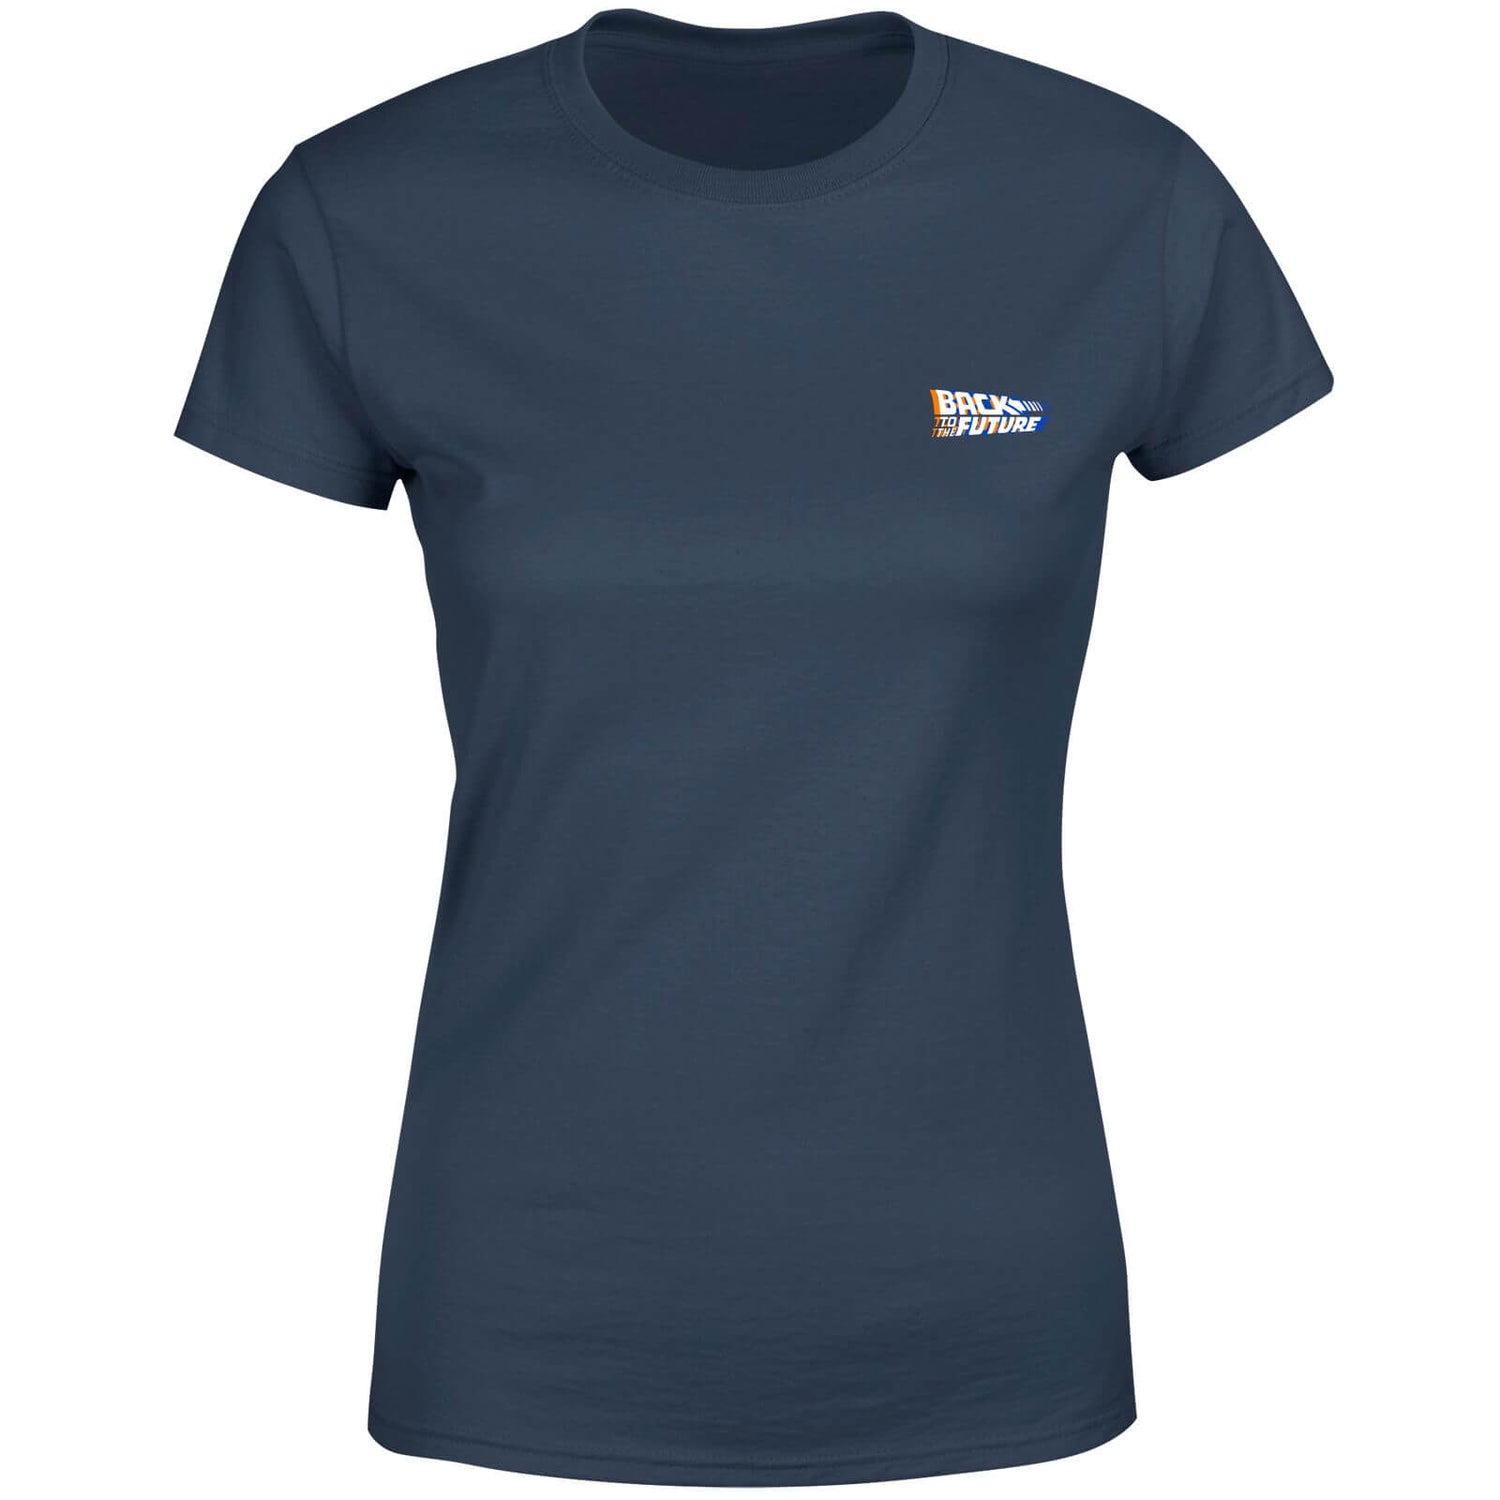 Back To The Future Women's T-Shirt - Navy